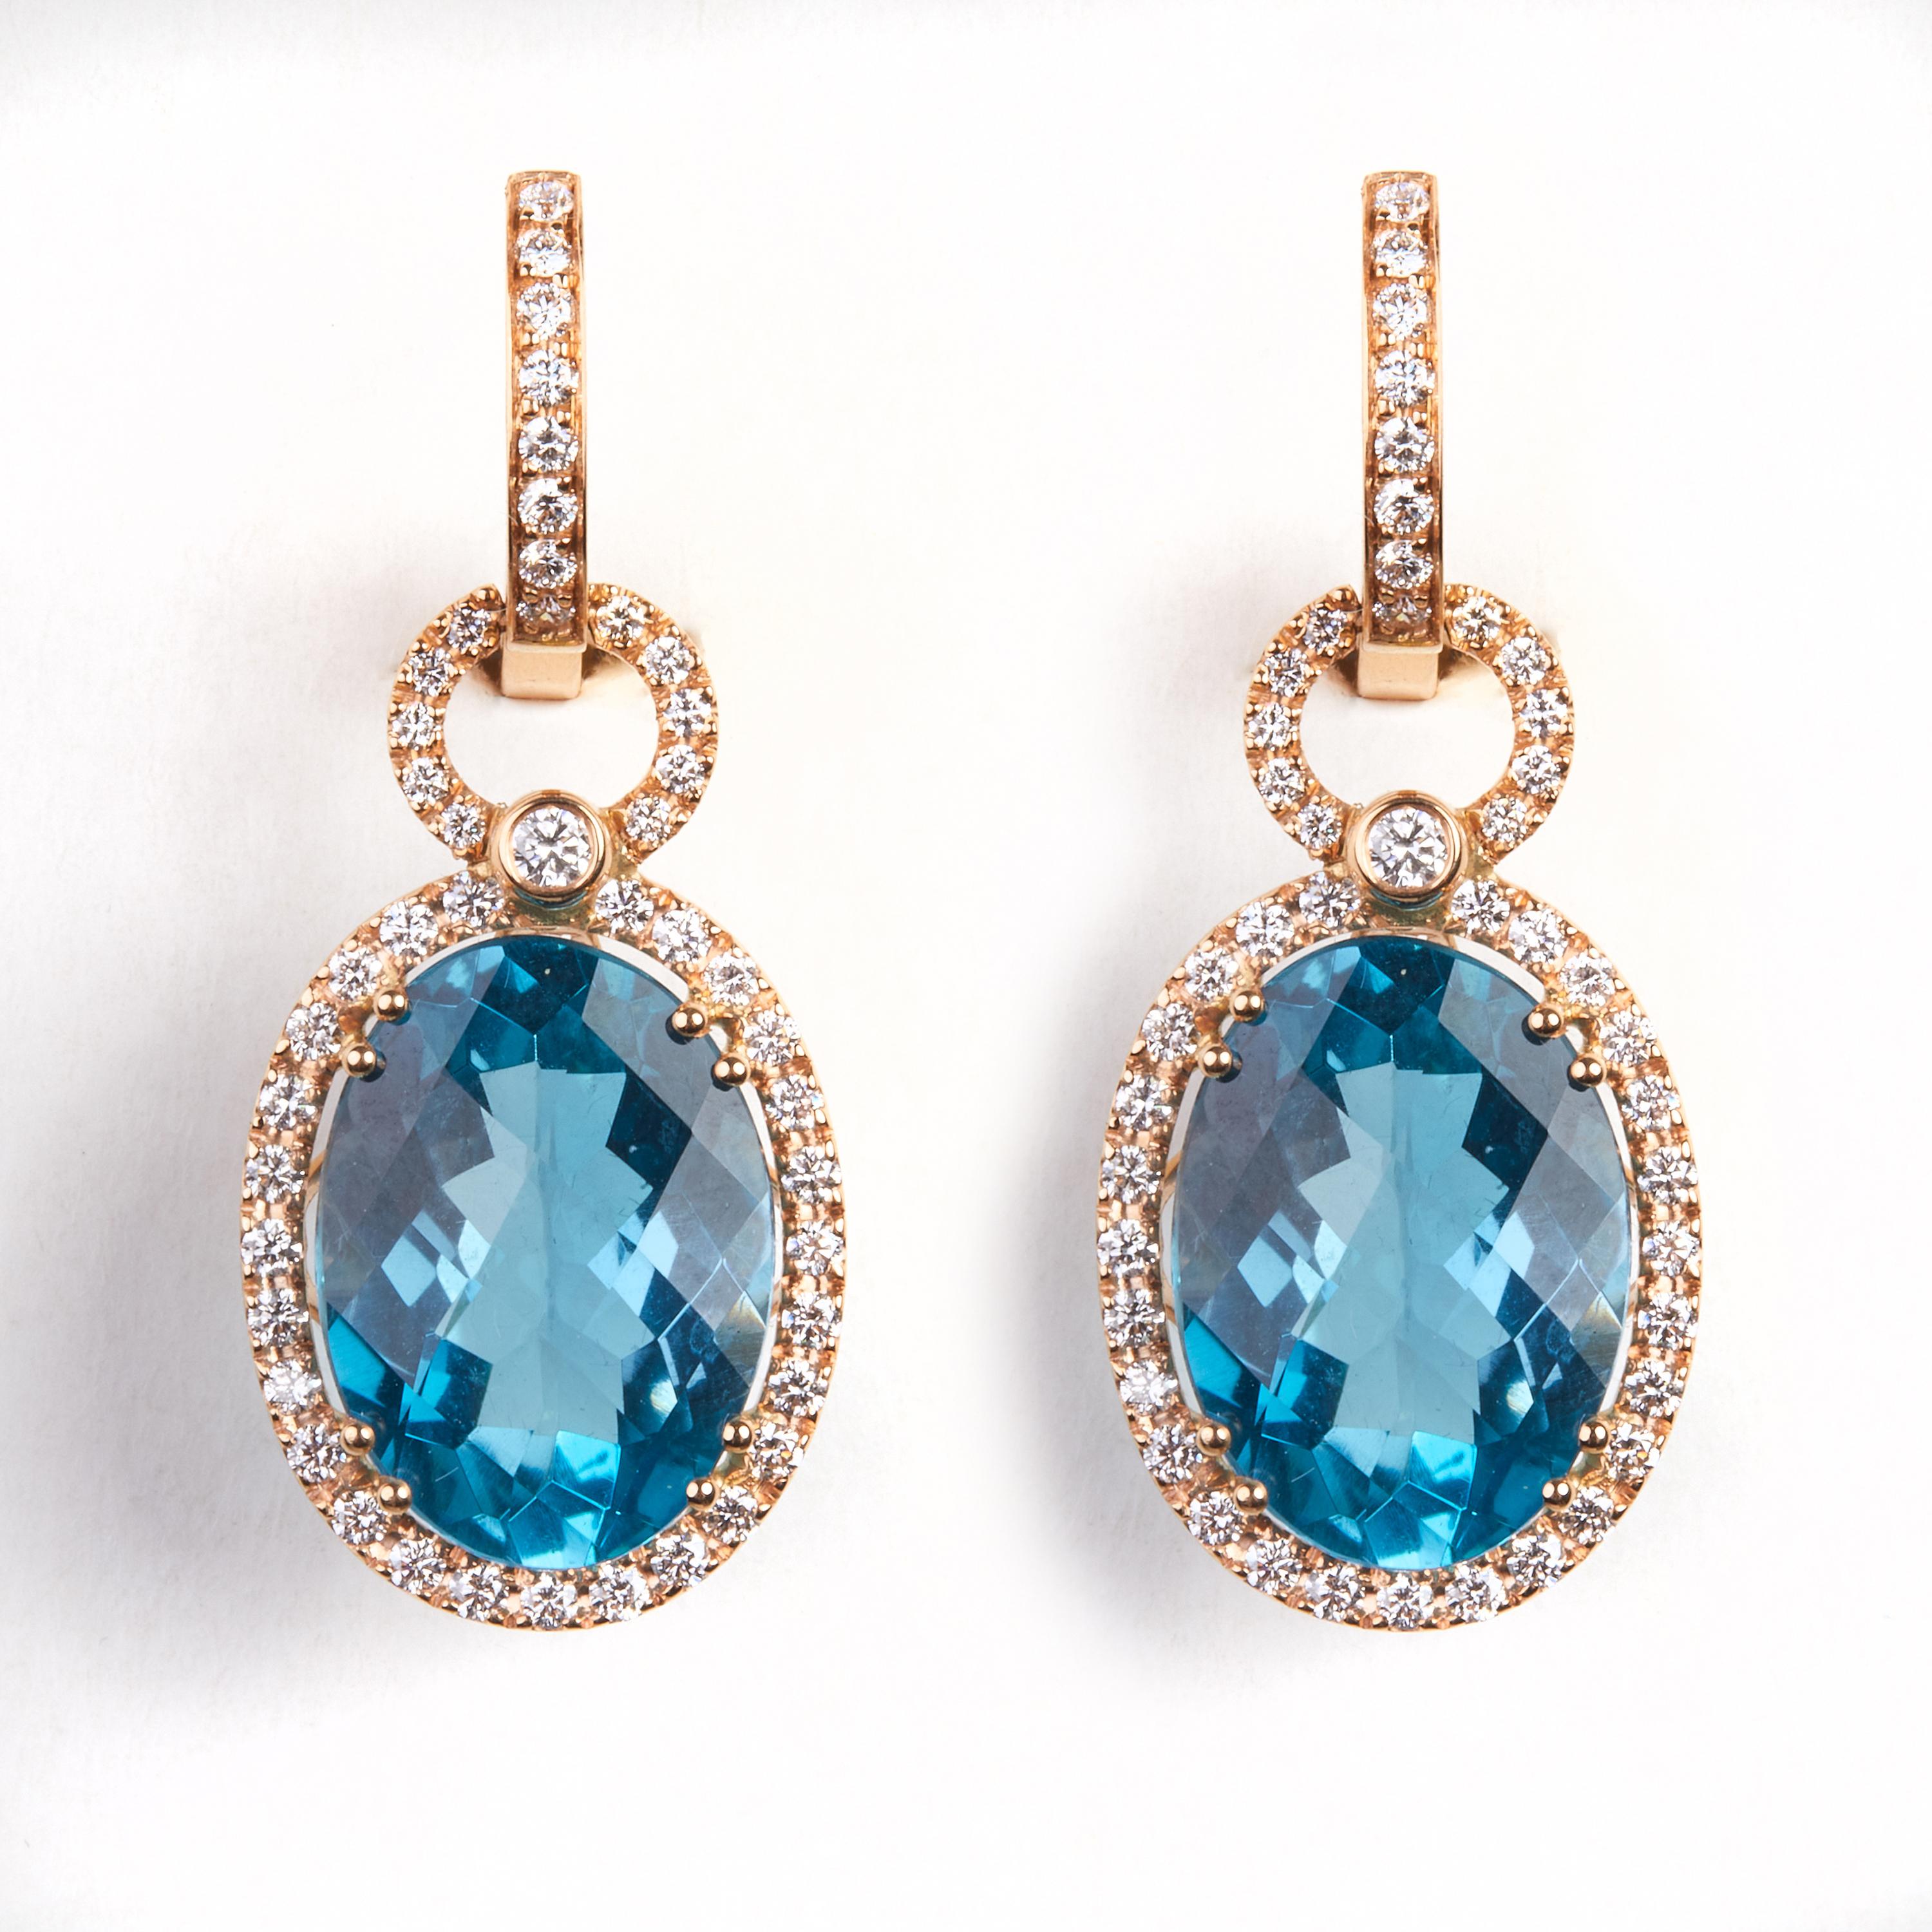 18 Karat Rose Gold  Diamons and Topaz Dangle Earrings

92 Diamonds 1.24 ct
2 Topaz Royal 27.20 ct.








Founded in 1974, Gianni Lazzaro is a family-owned jewelery company based out of Düsseldorf, Germany.
Although rooted in Germany, Gianni